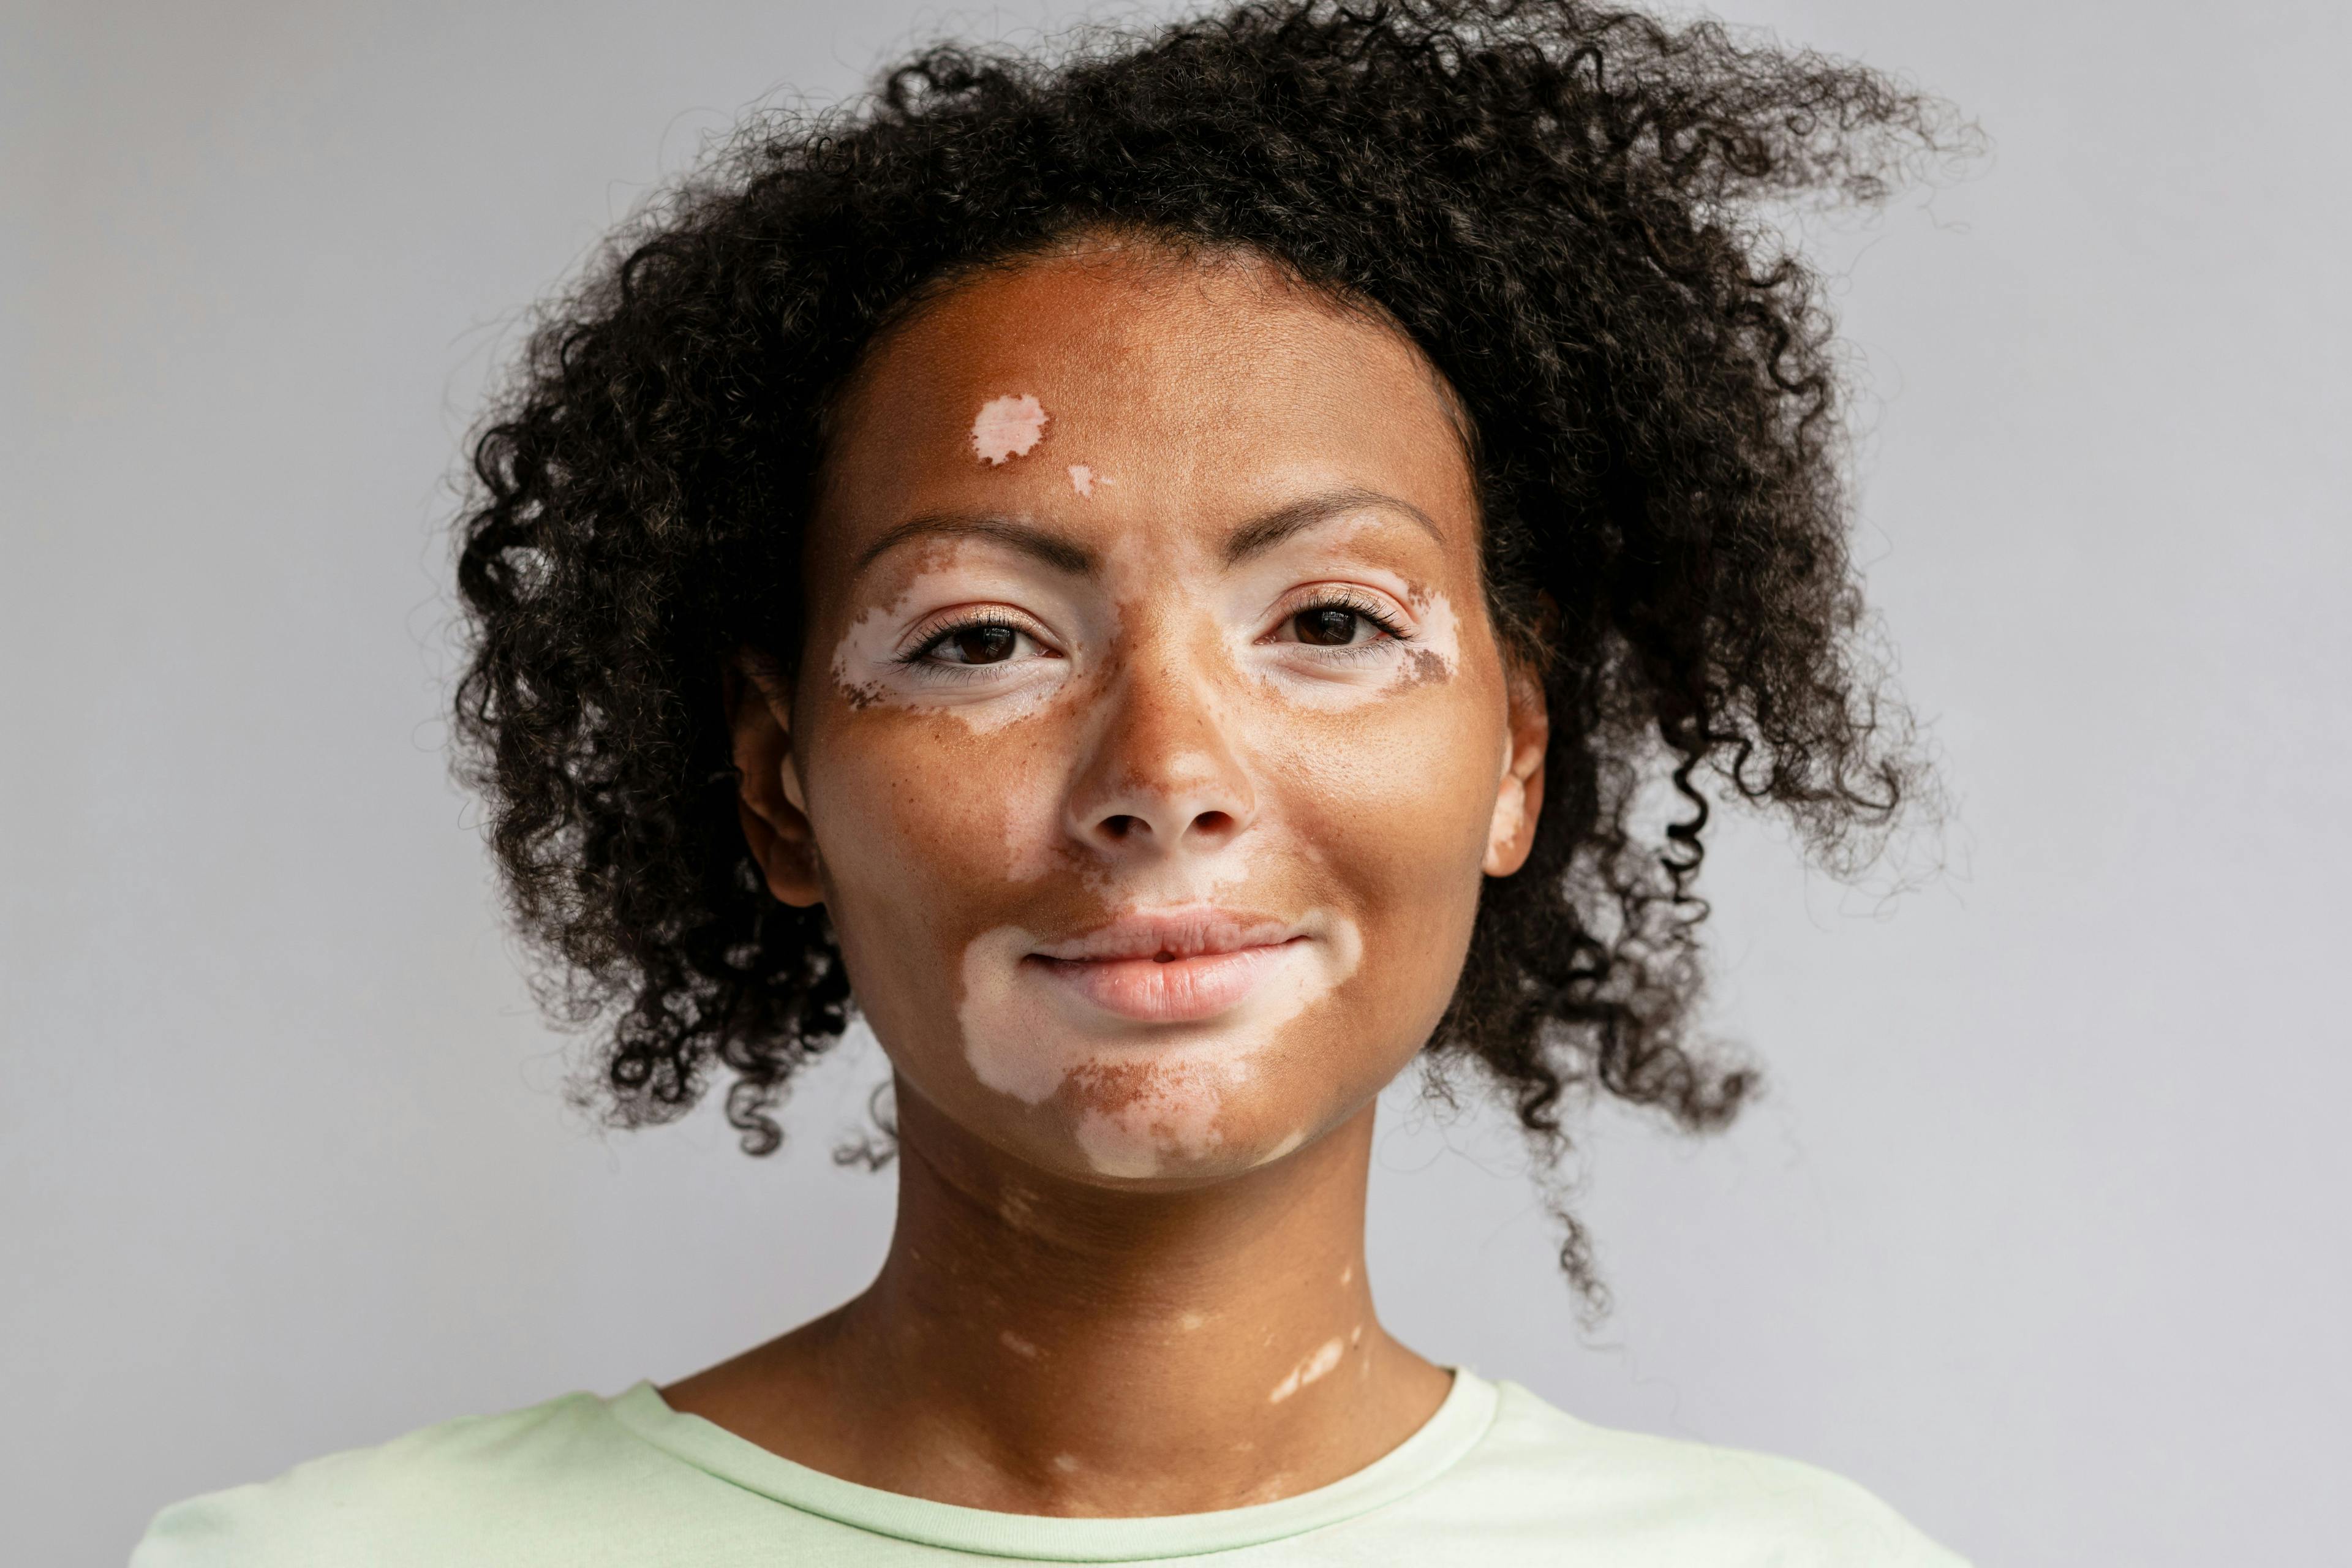 Incyte’s Opzelura Shows Significant Improvements in Phase 3 Vitiligo Trial